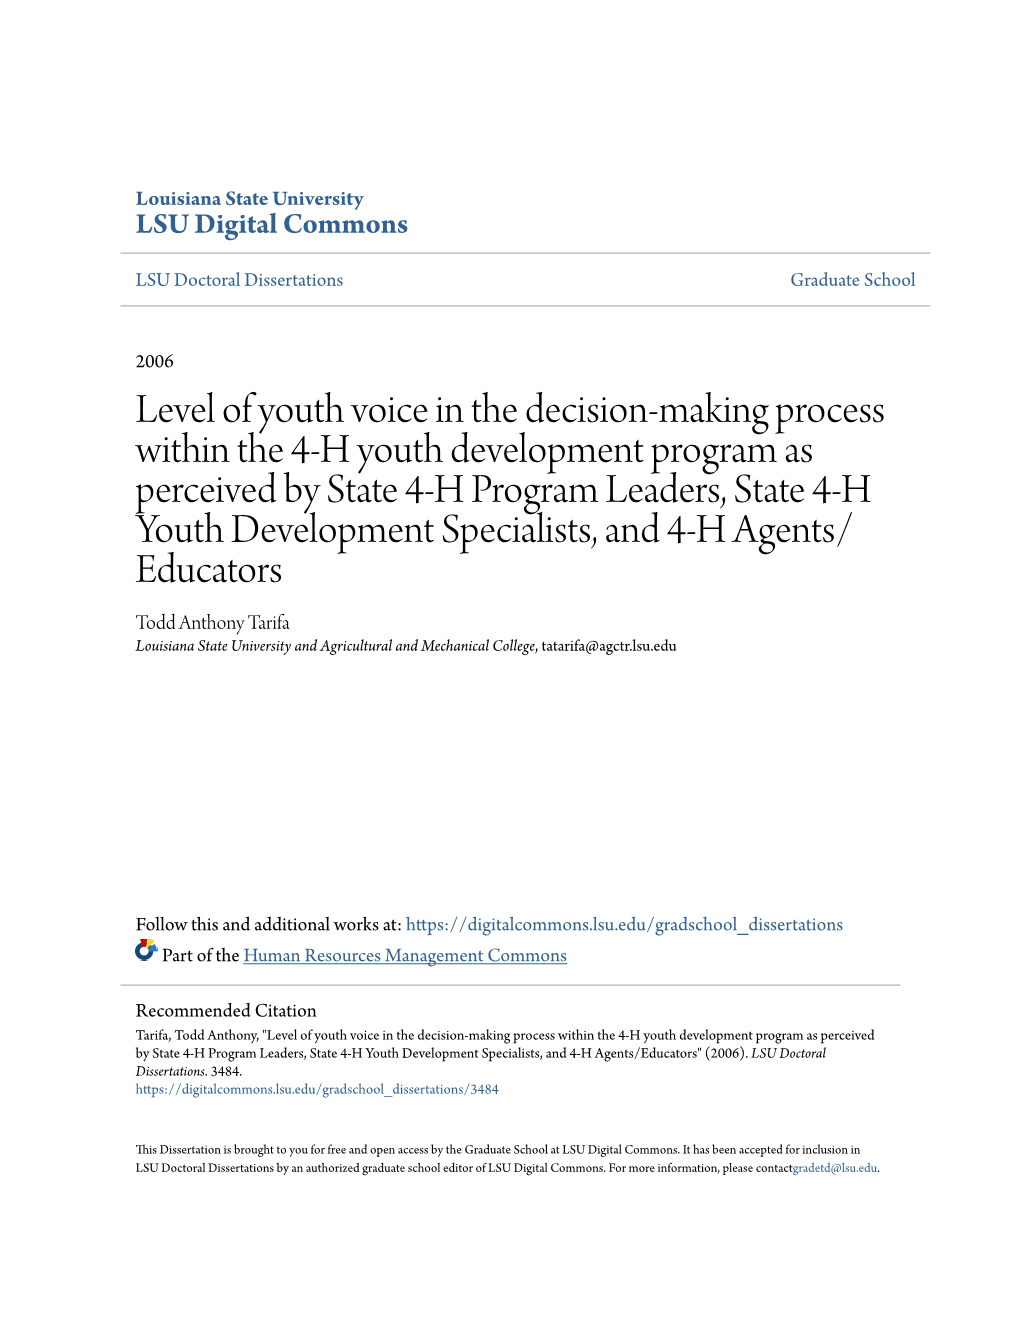 Level of Youth Voice in the Decision-Making Process Within the 4-H Youth Development Program As Perceived by State 4-H Program L